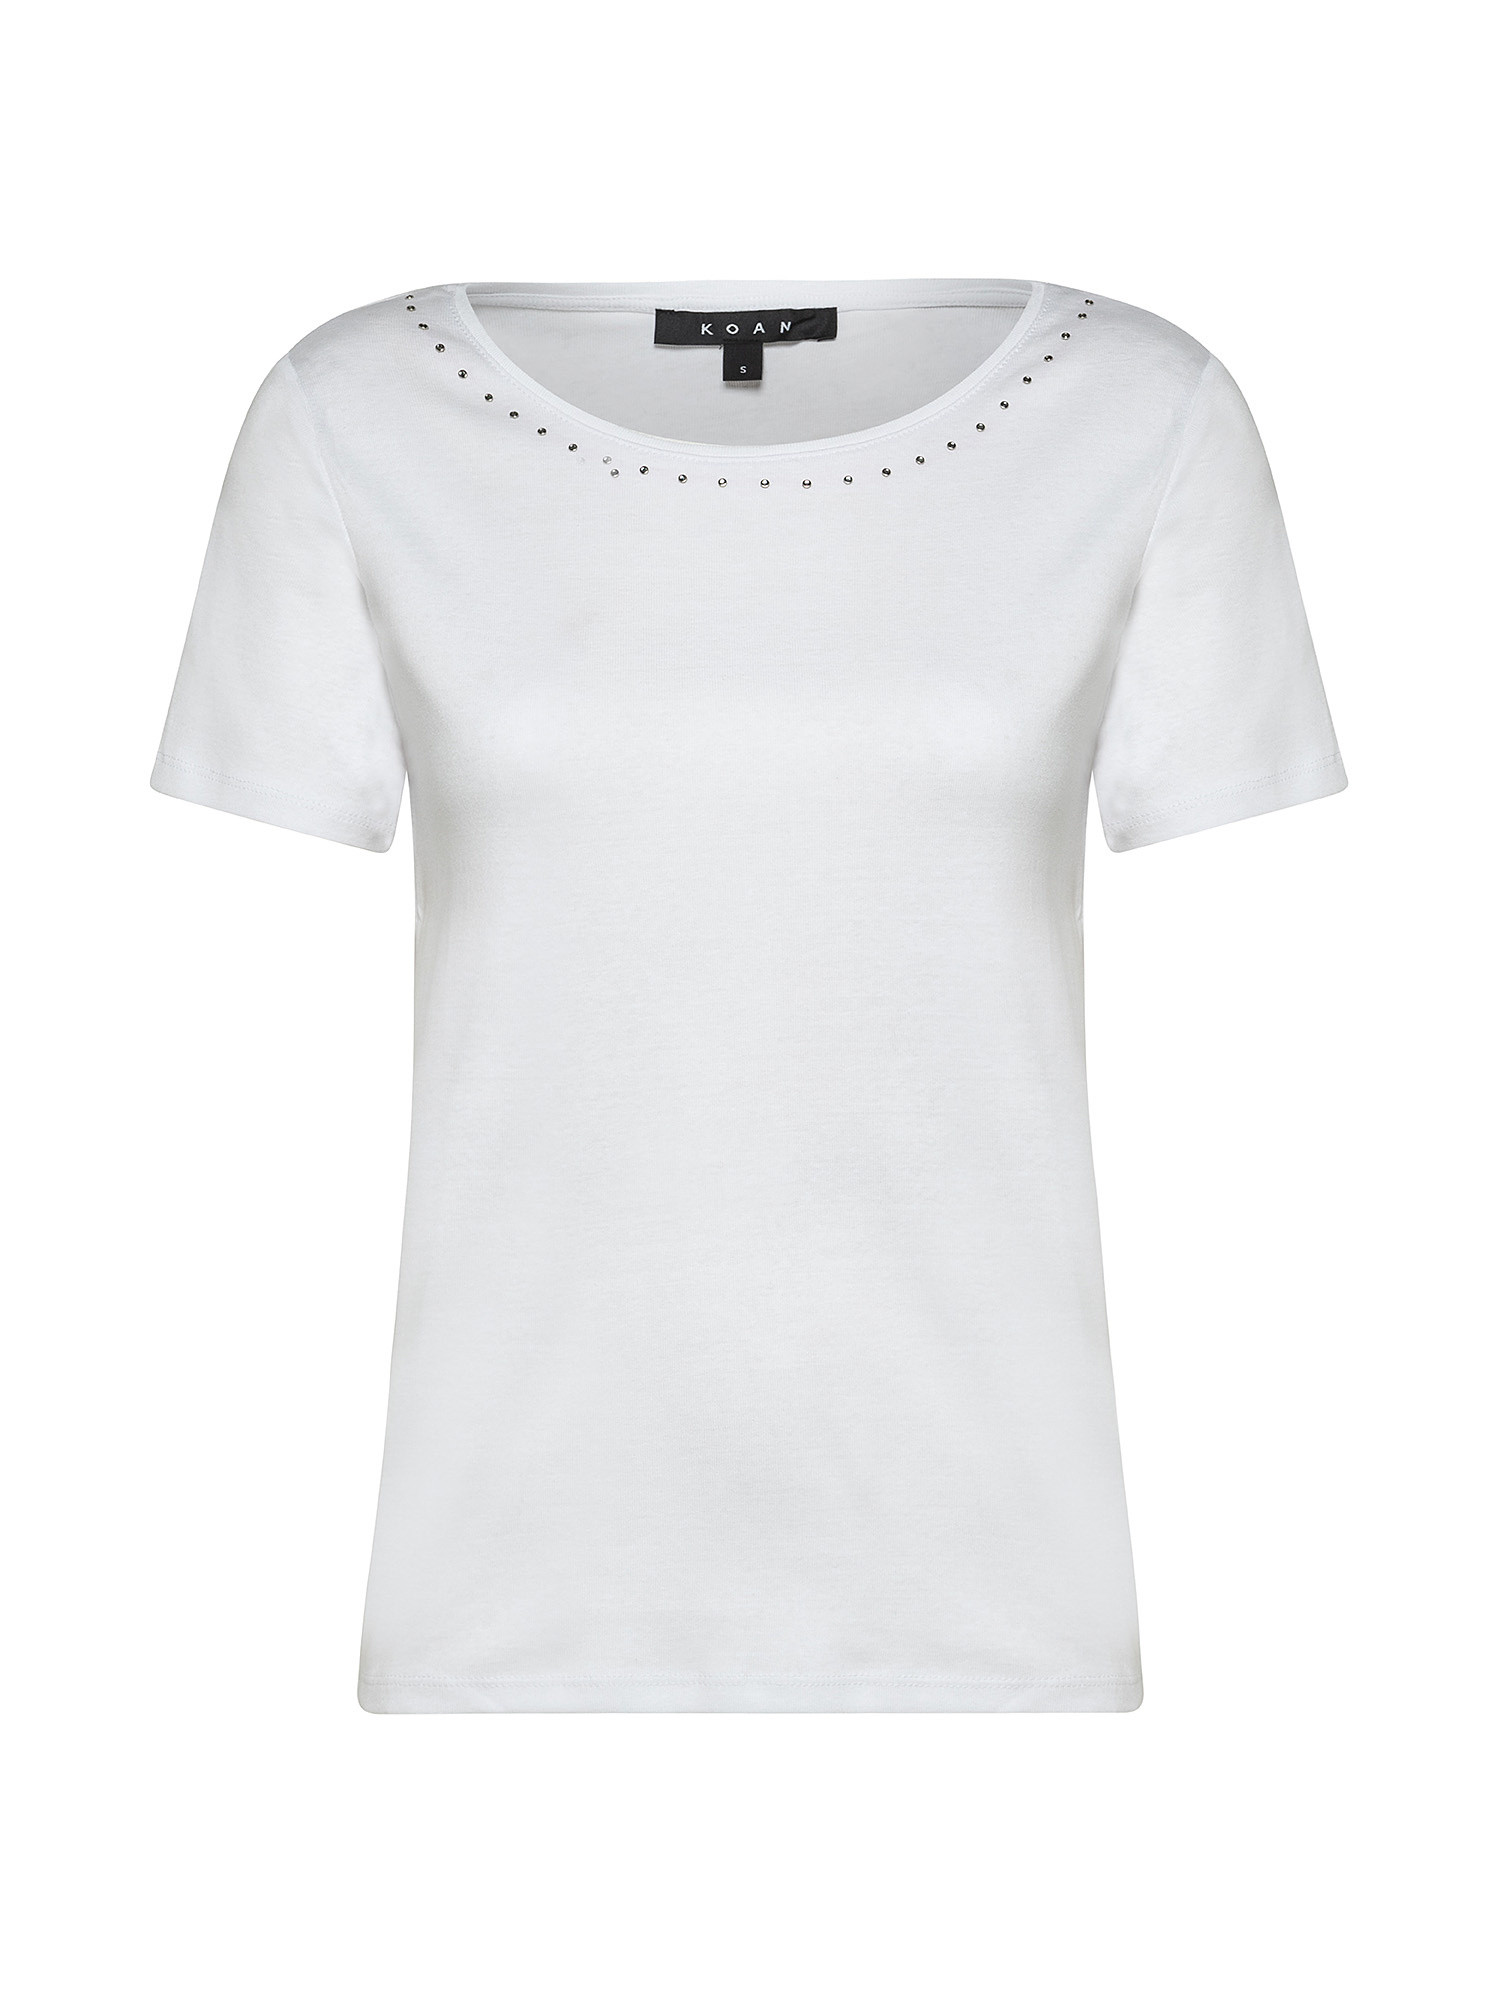 Classic polo shirt, White, large image number 0